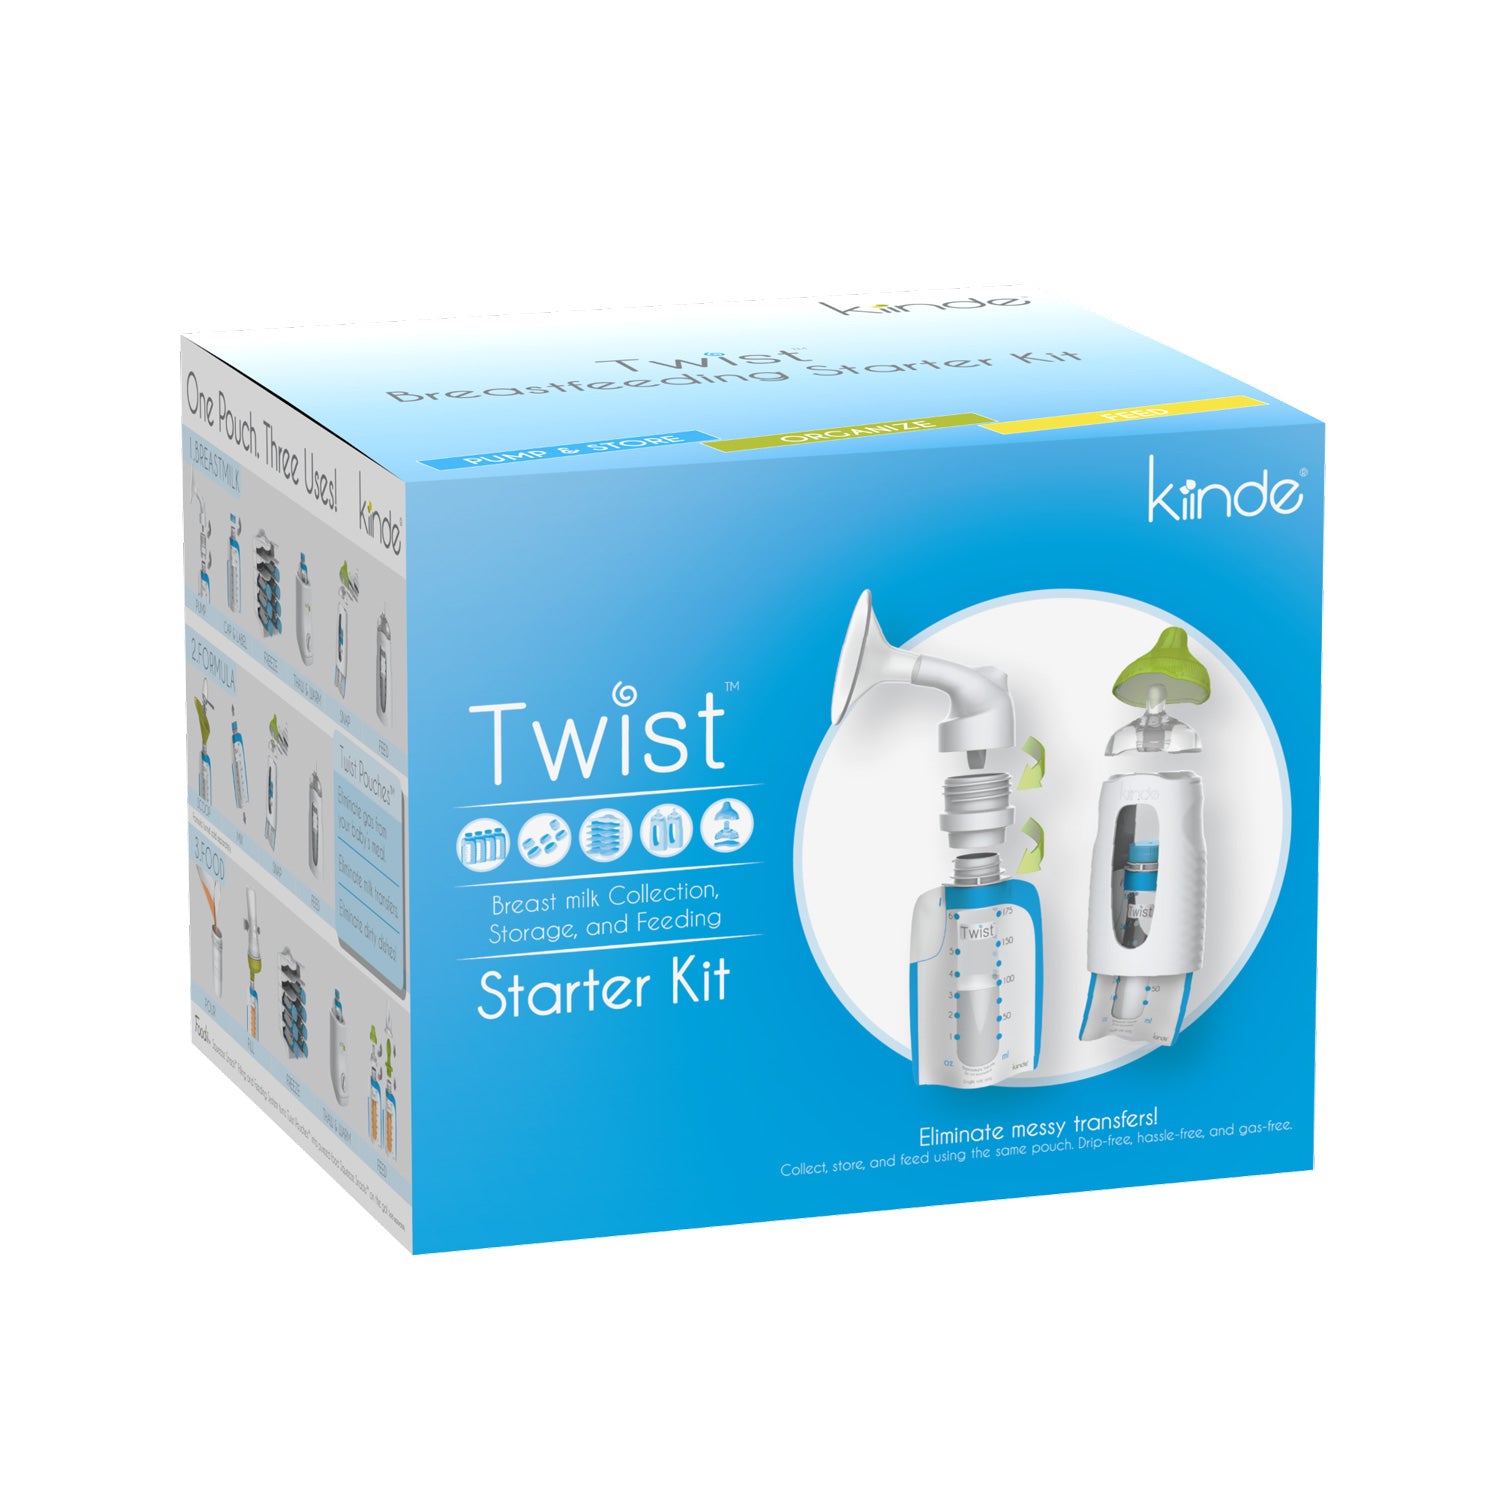 Kiinde Twist Review: Tips for Using the Kiinde System (2022)